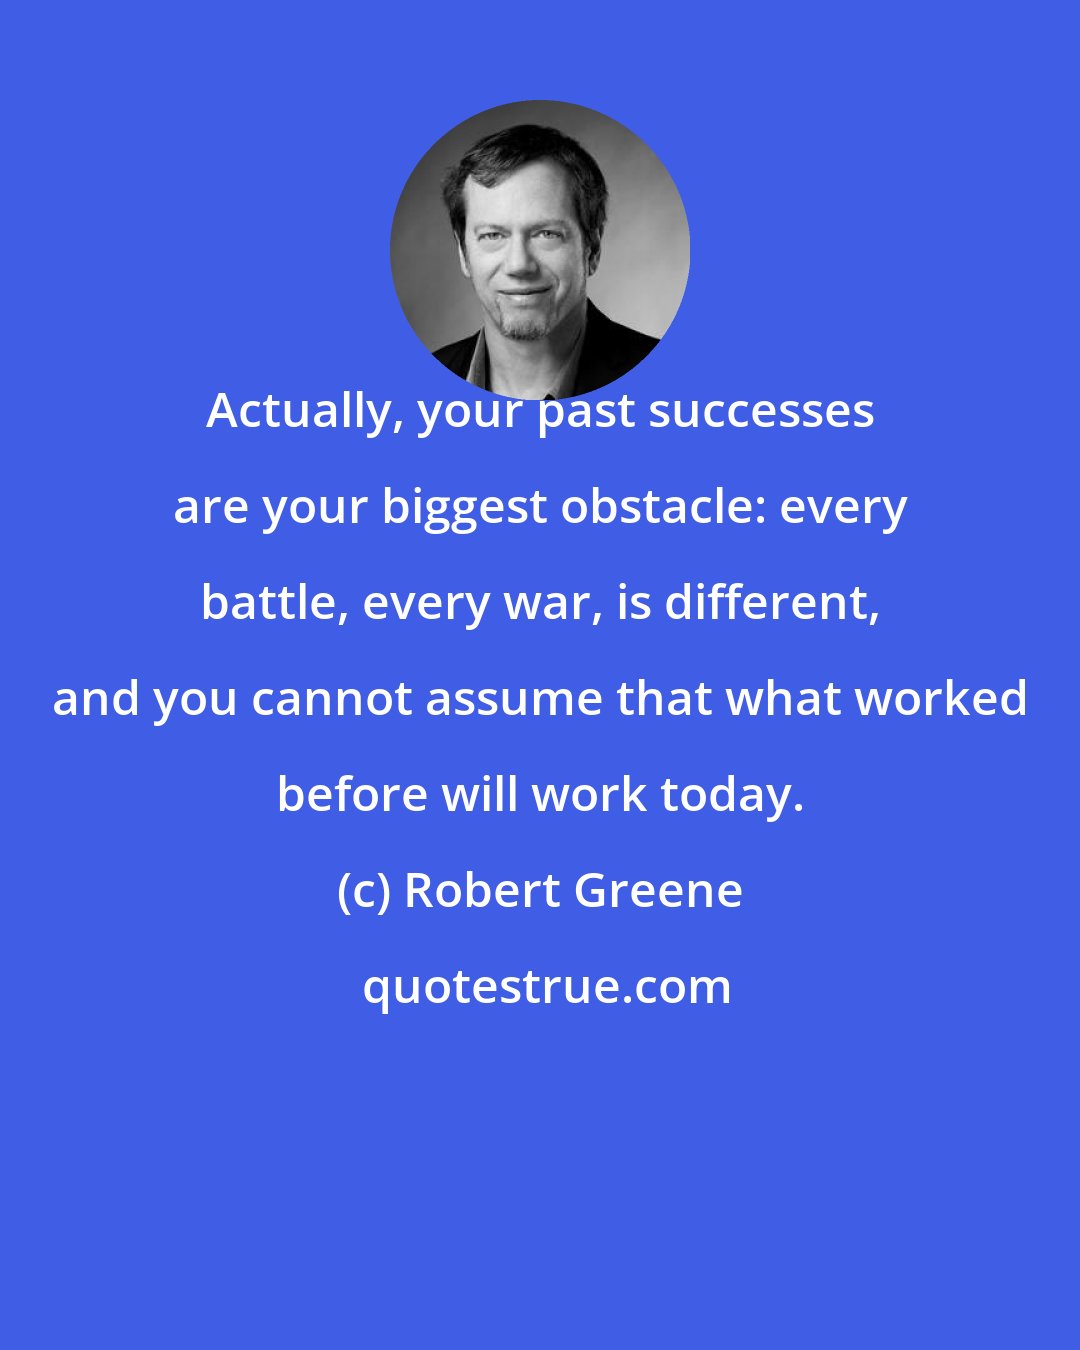 Robert Greene: Actually, your past successes are your biggest obstacle: every battle, every war, is different, and you cannot assume that what worked before will work today.